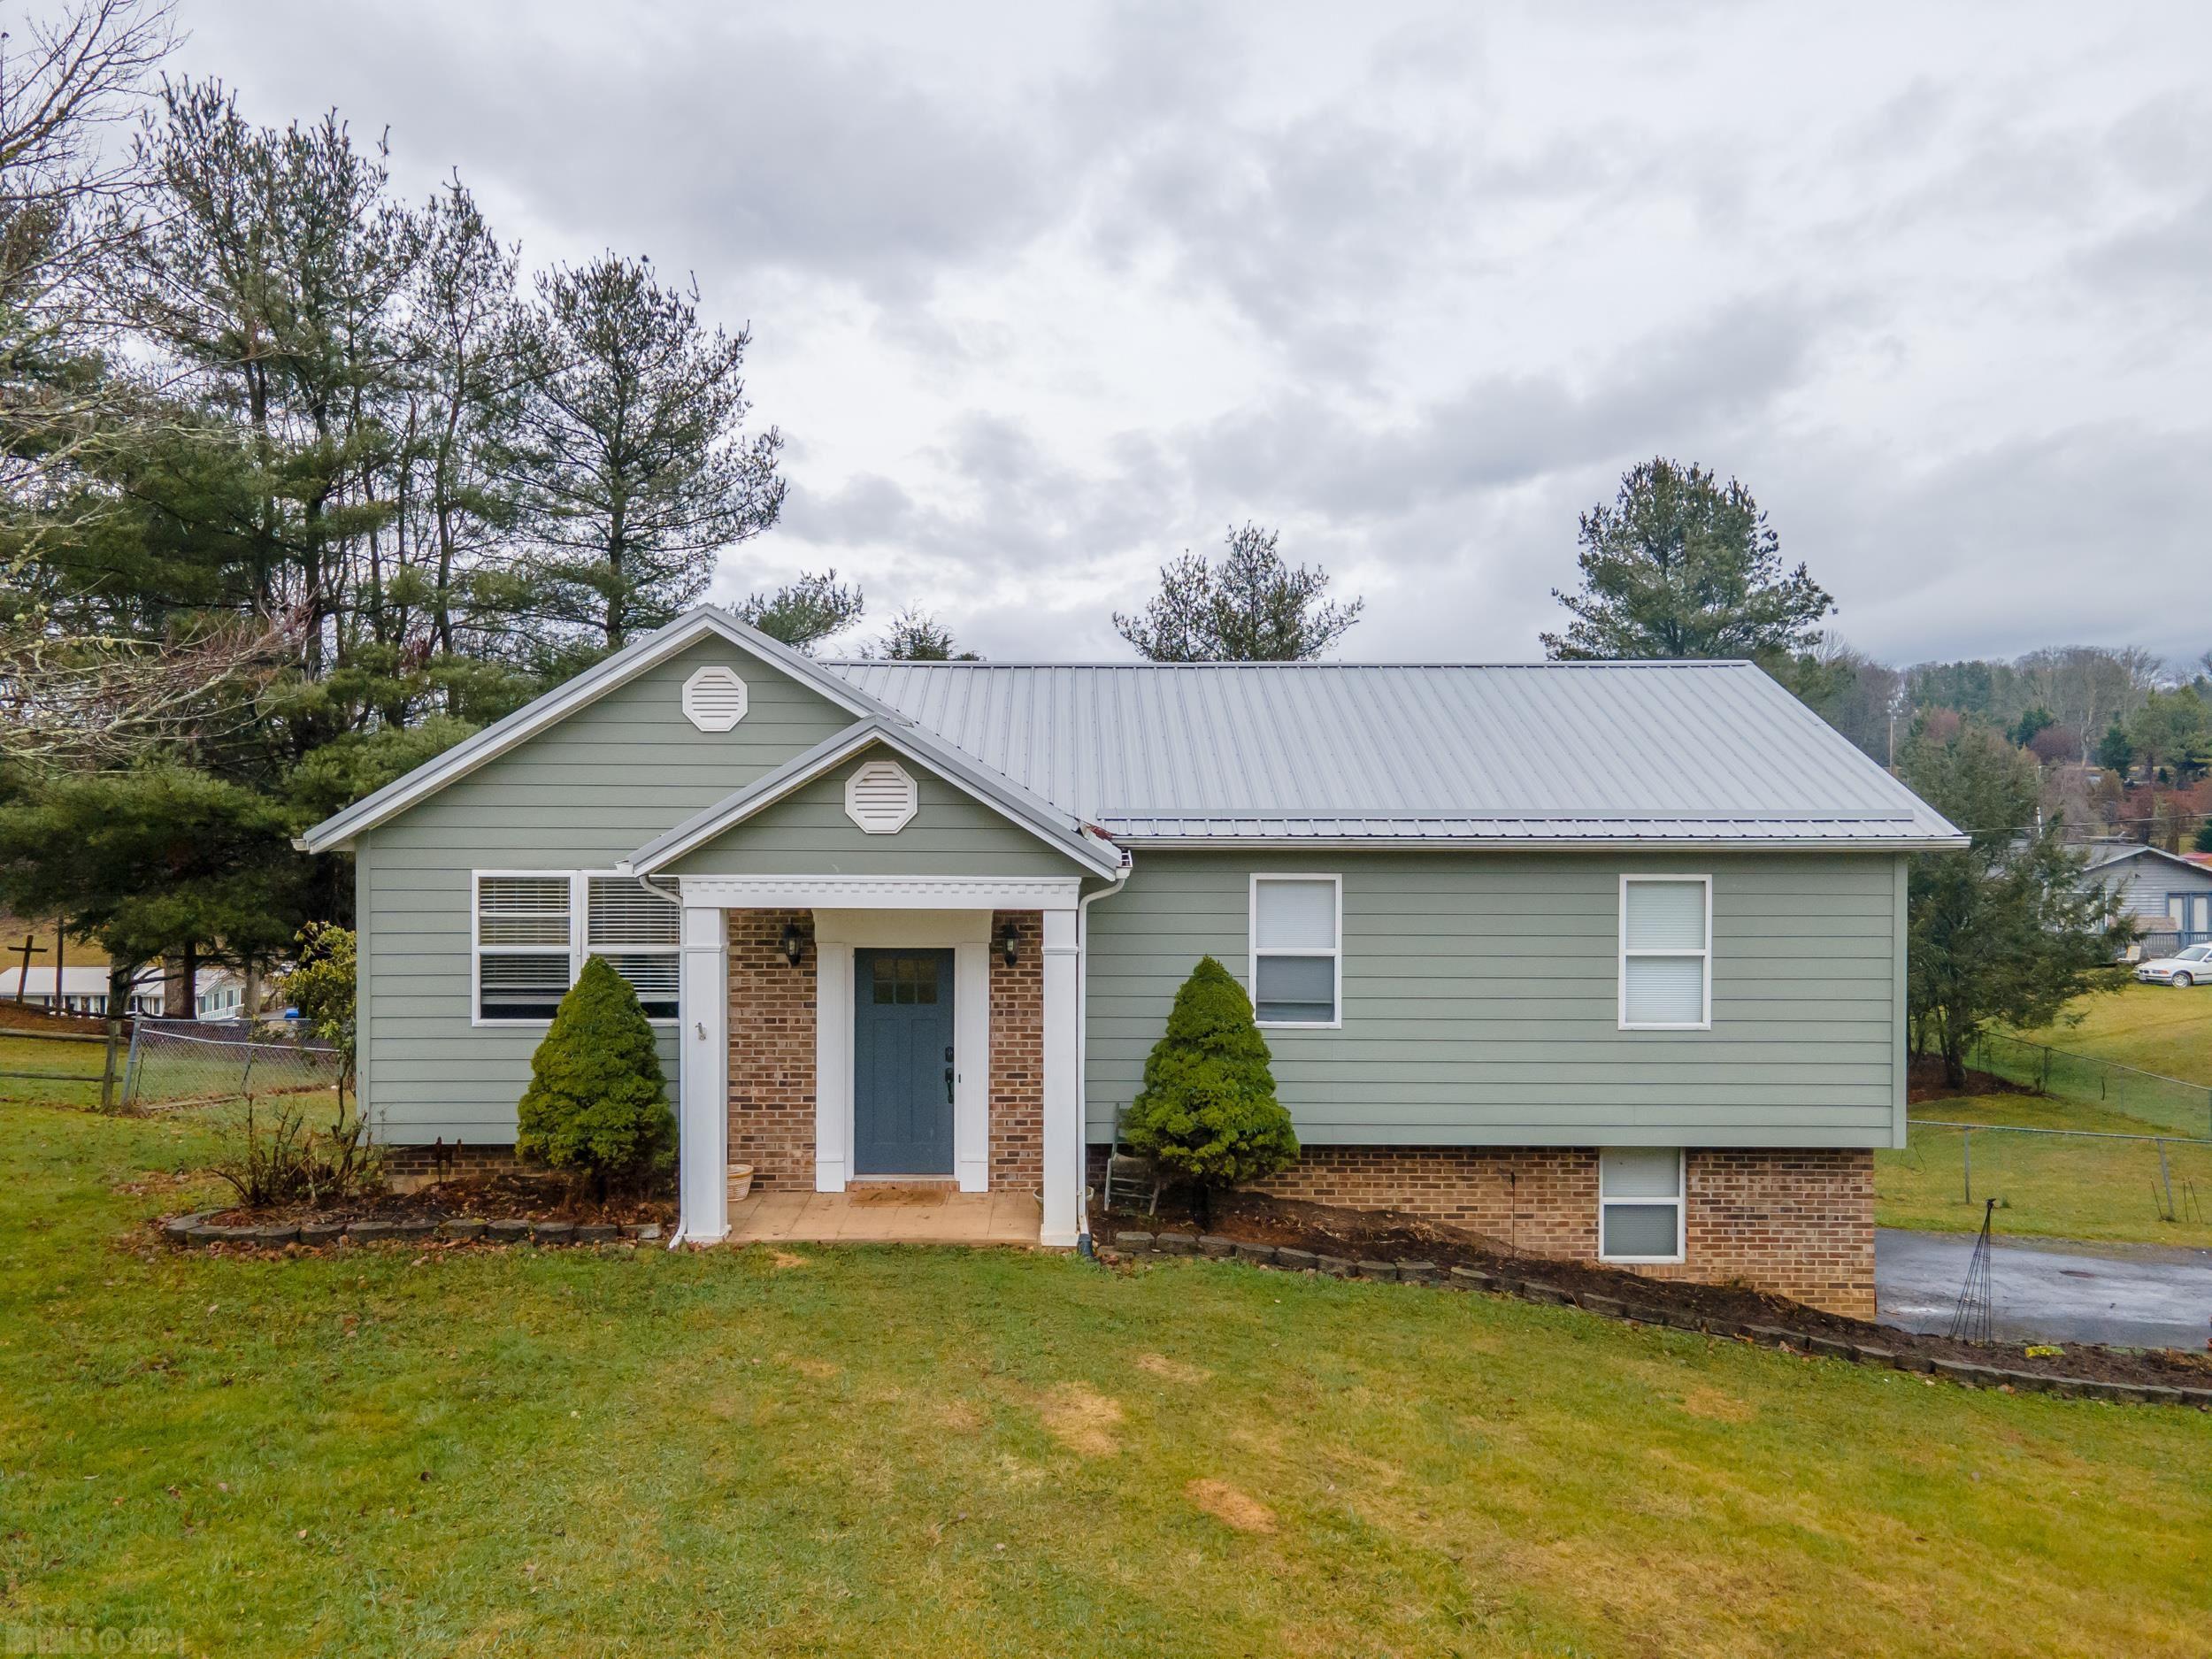 Take a look at this beautifully remodeled home within town limits of Galax. You are in a well established neighborhood, but there are no restrictions either. This home is perfect for the family. You have a 2 car drive-under garage. The back yard is spacious and already fenced in for the dogs and kids to play. This is a nice quiet street. You are convenient to all that Galax has to offer, such as a hospital, Walmart, Lowes, Hobby Lobby, a bowling alley, a movie theater, many different eating establishments, and for the outdoors person, there is plenty of fishing and hiking with the New River and New River Trail. You also have your choice of Fiber Optic High Speed internet. You're on town water and sewer. You are less than 20 minutes to Interstate 77, about 35 minutes to Mount Airy, NC, and only an hour to Winston Salem, NC. This home is completely move-in ready. It has beautiful hardwood floors and tile throughout. It also has HardiPlank siding, and a metal roof. Call today!